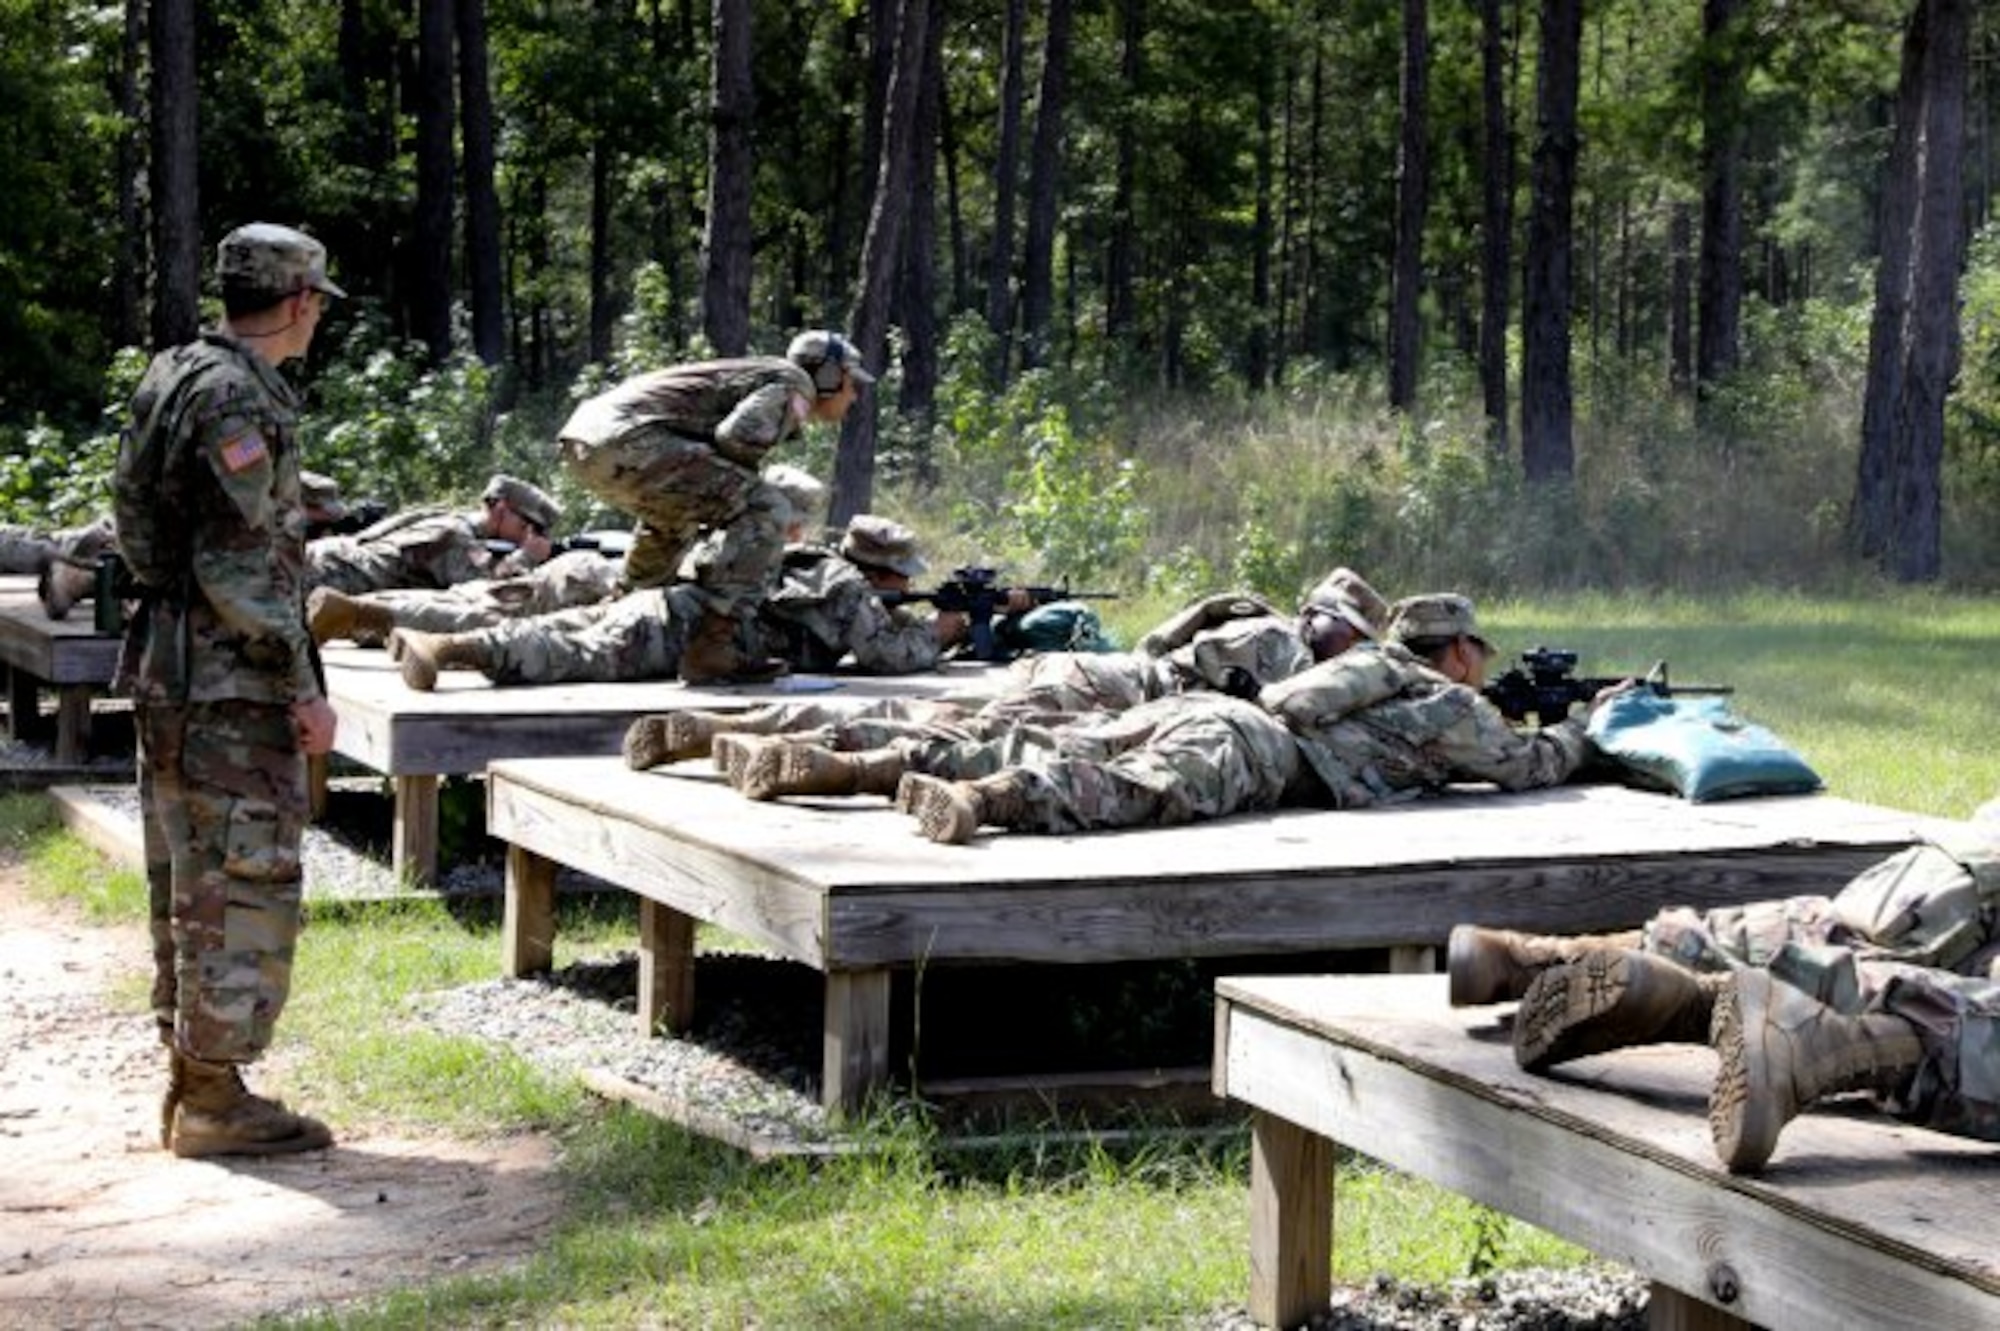 Soldiers with C Troop, 2nd Squadron, 15th Cavalry Regiment, a one station unit training for cavalry scouts with the Maneuver Center of Excellence, zero their M4 carbines at Soto Range on Fort Benning, Ga., Aug. 21.